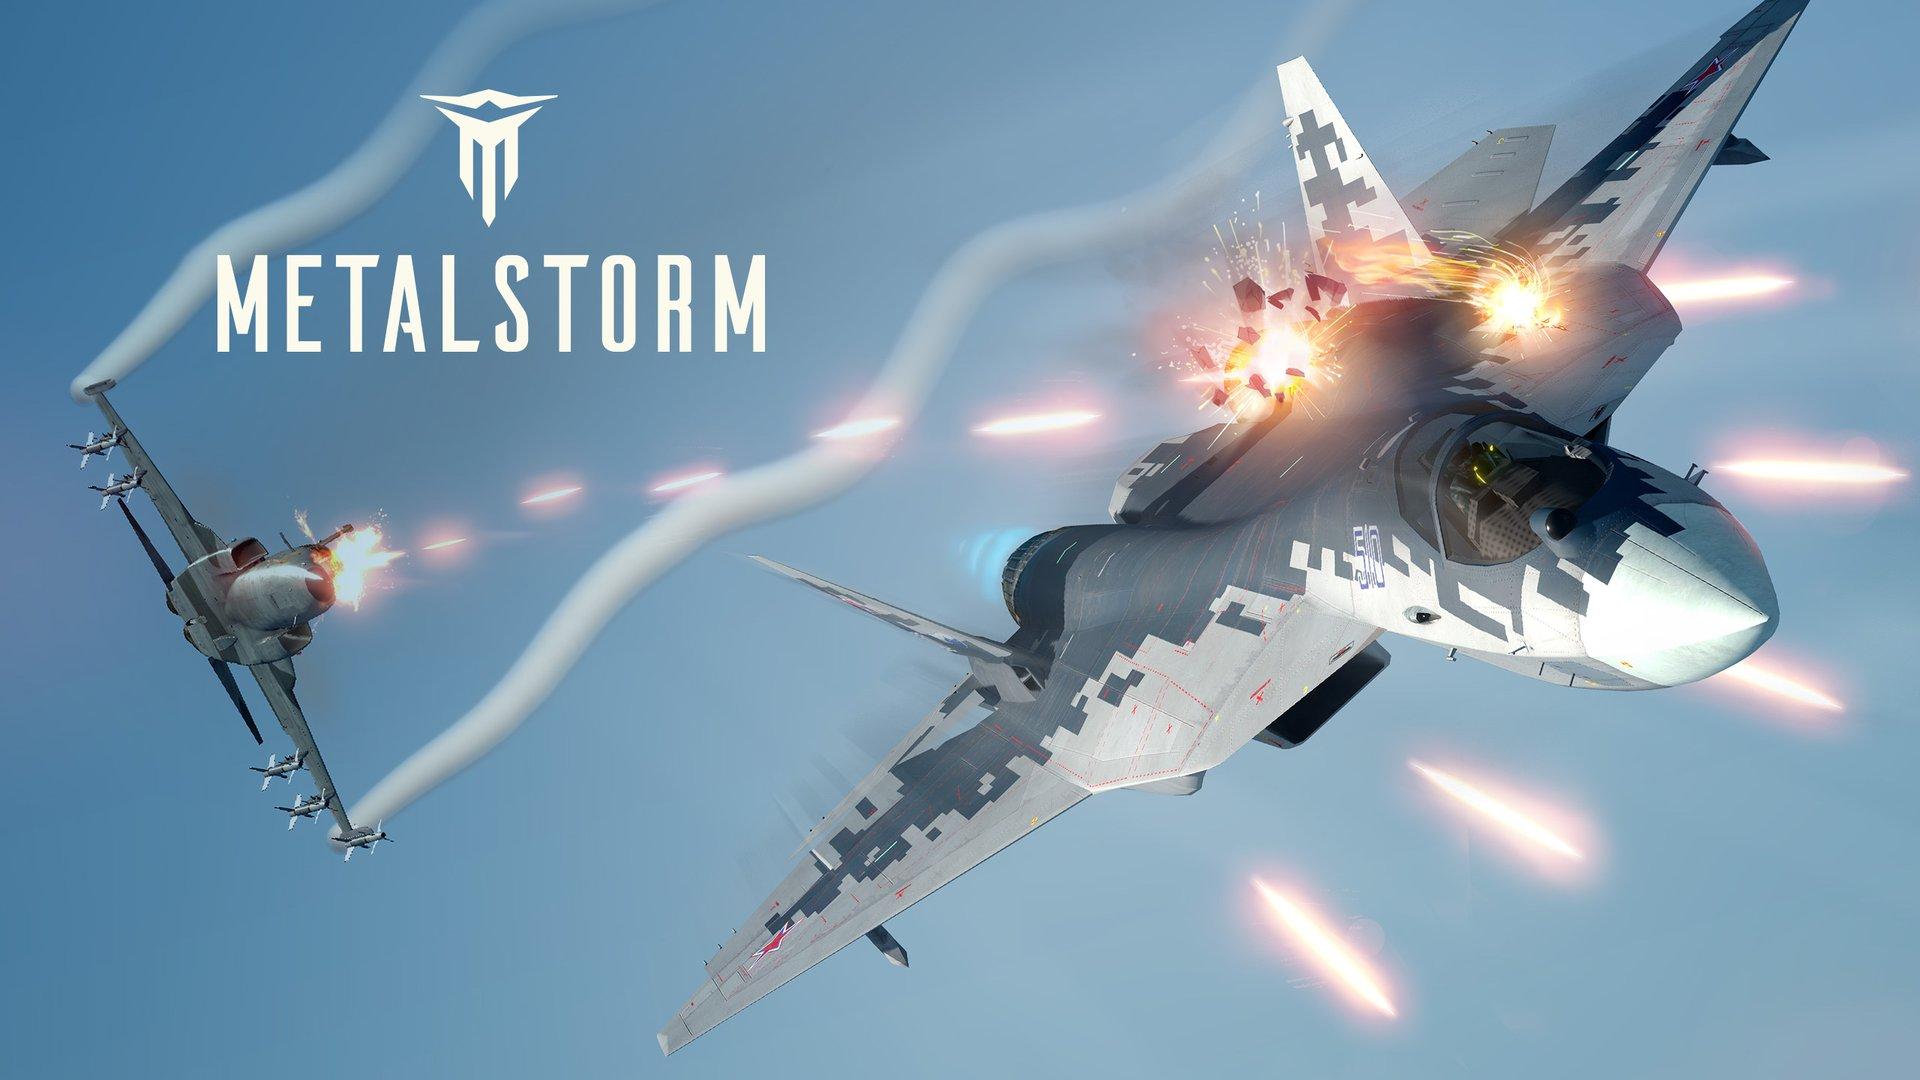 Play Metalstorm for Free